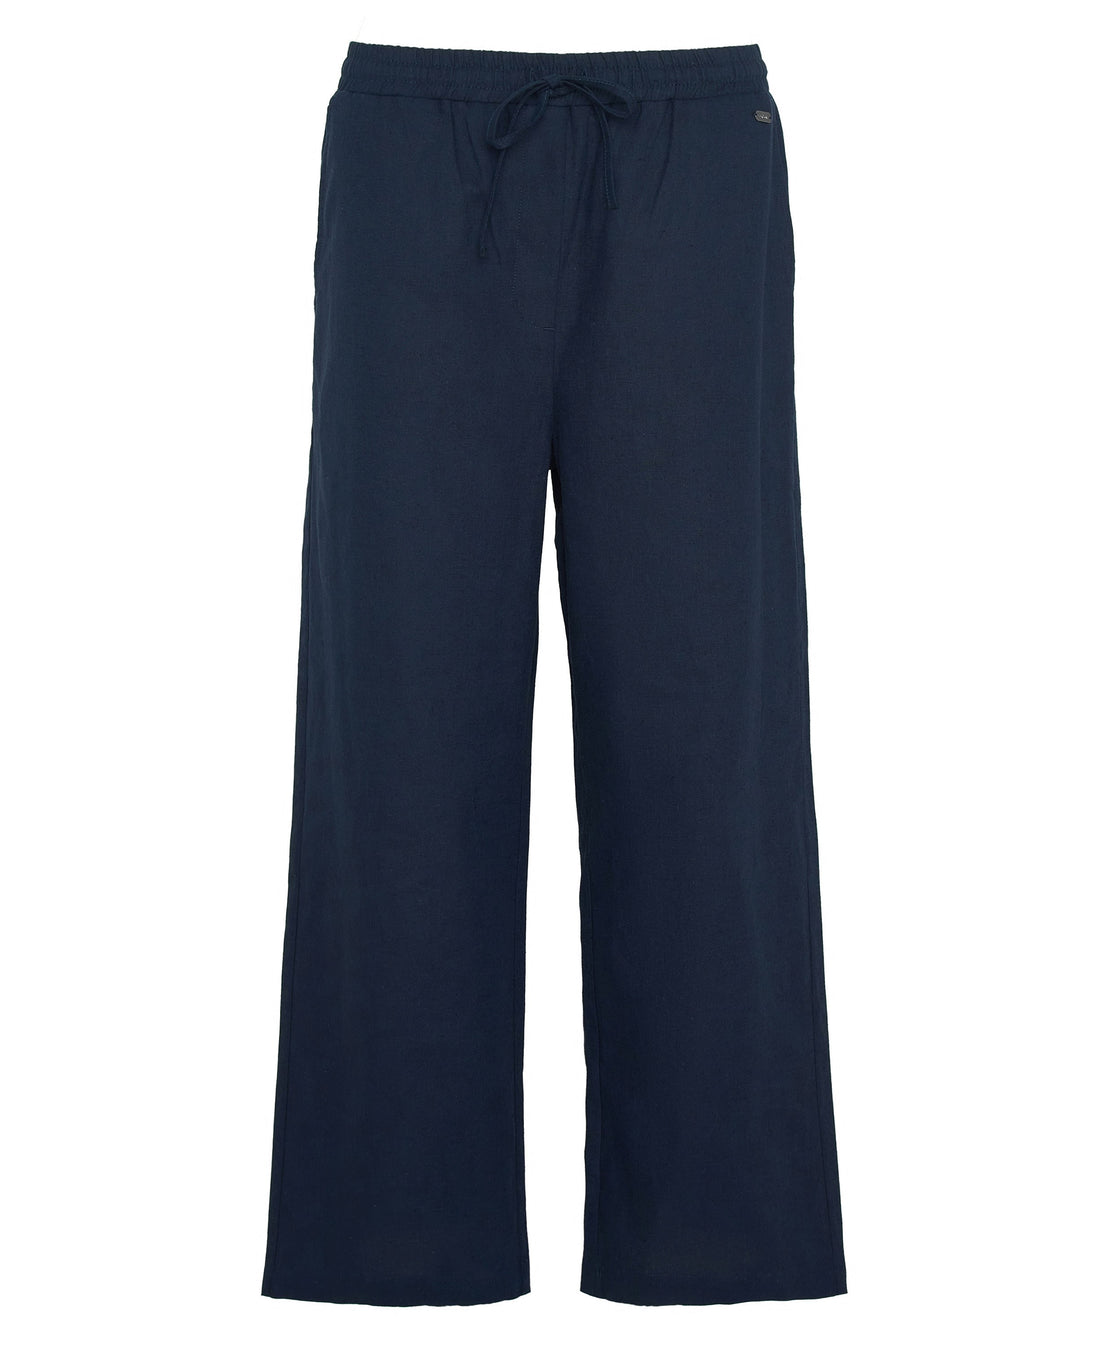 Christie Wide-Leg Trousers - Navy